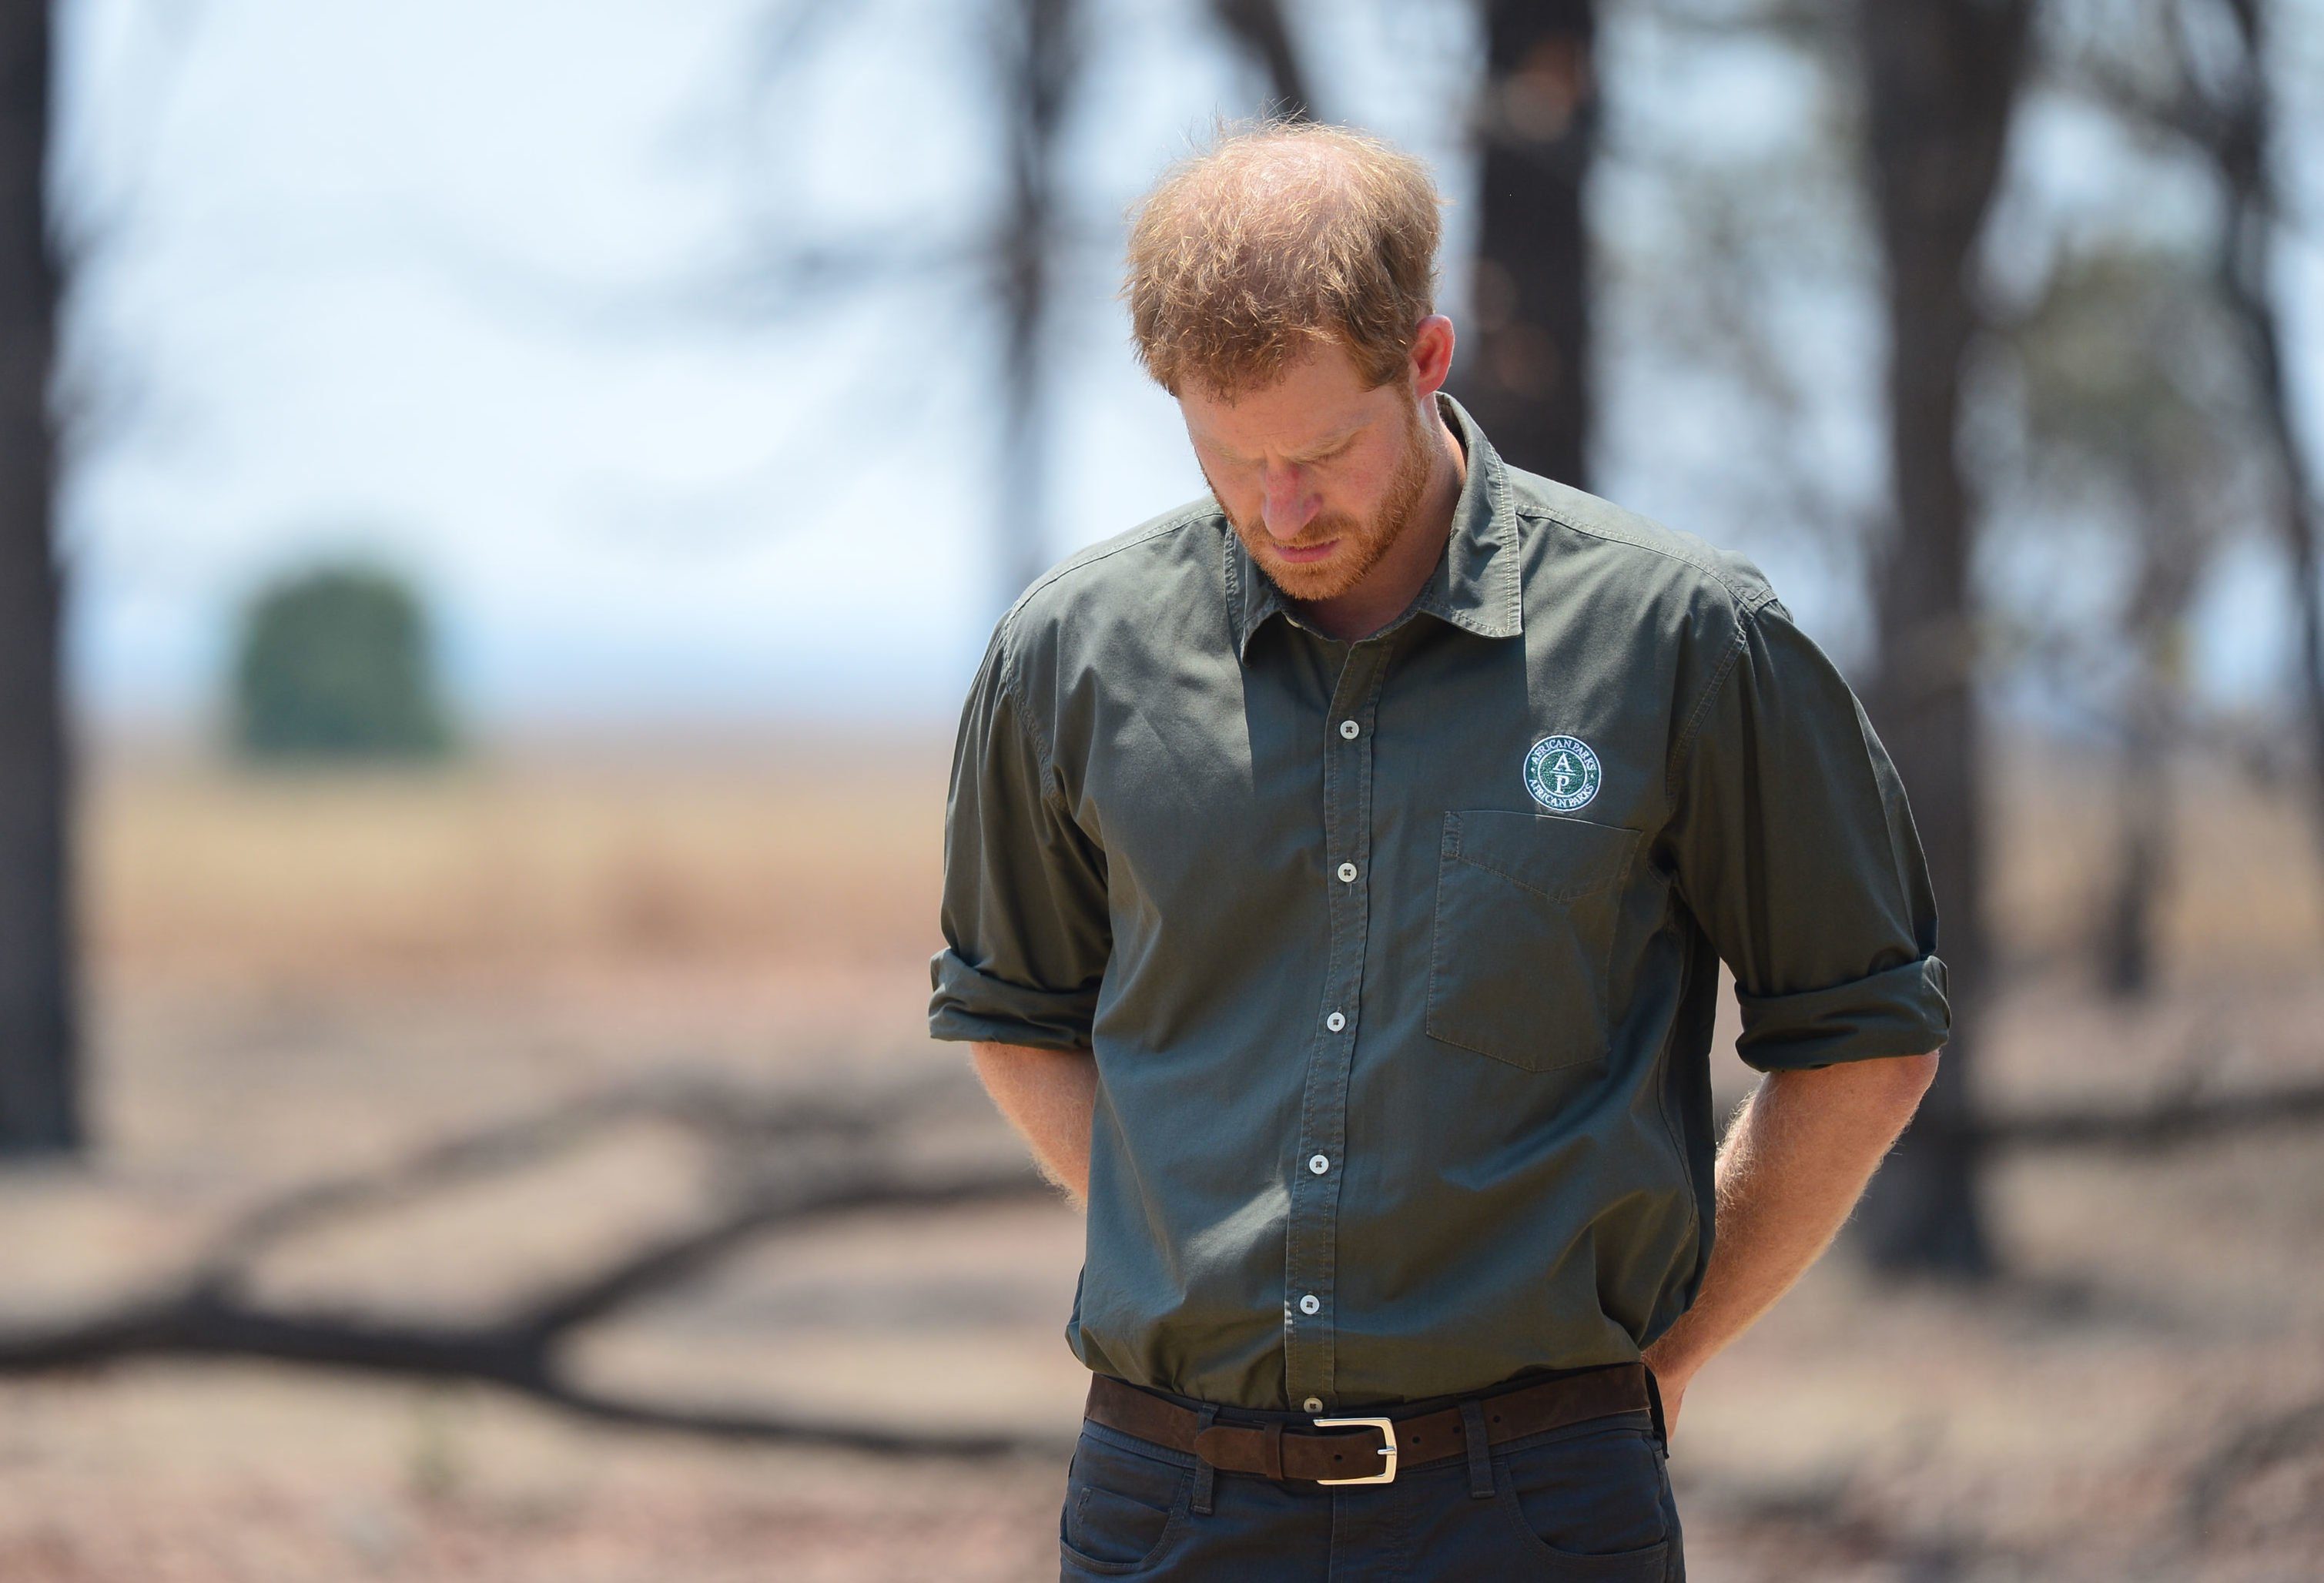 Mandatory Credit: Photo by Dominic Lipinski/Shutterstock (10430652l) Prince Harry pays tribute at the memorial site for Guardsman Mathew Talbot of the Coldstream Guards at the Liwonde National Park in Malawi, on day eight of the royal tour of Africa. PA Photo. Picture date: Monday September 30, 2019. Guardsman Talbot lost his life in May 2019 on a joint anti-poaching patrol with local park rangers. Prince Harry visit to Africa - 30 Sep 2019